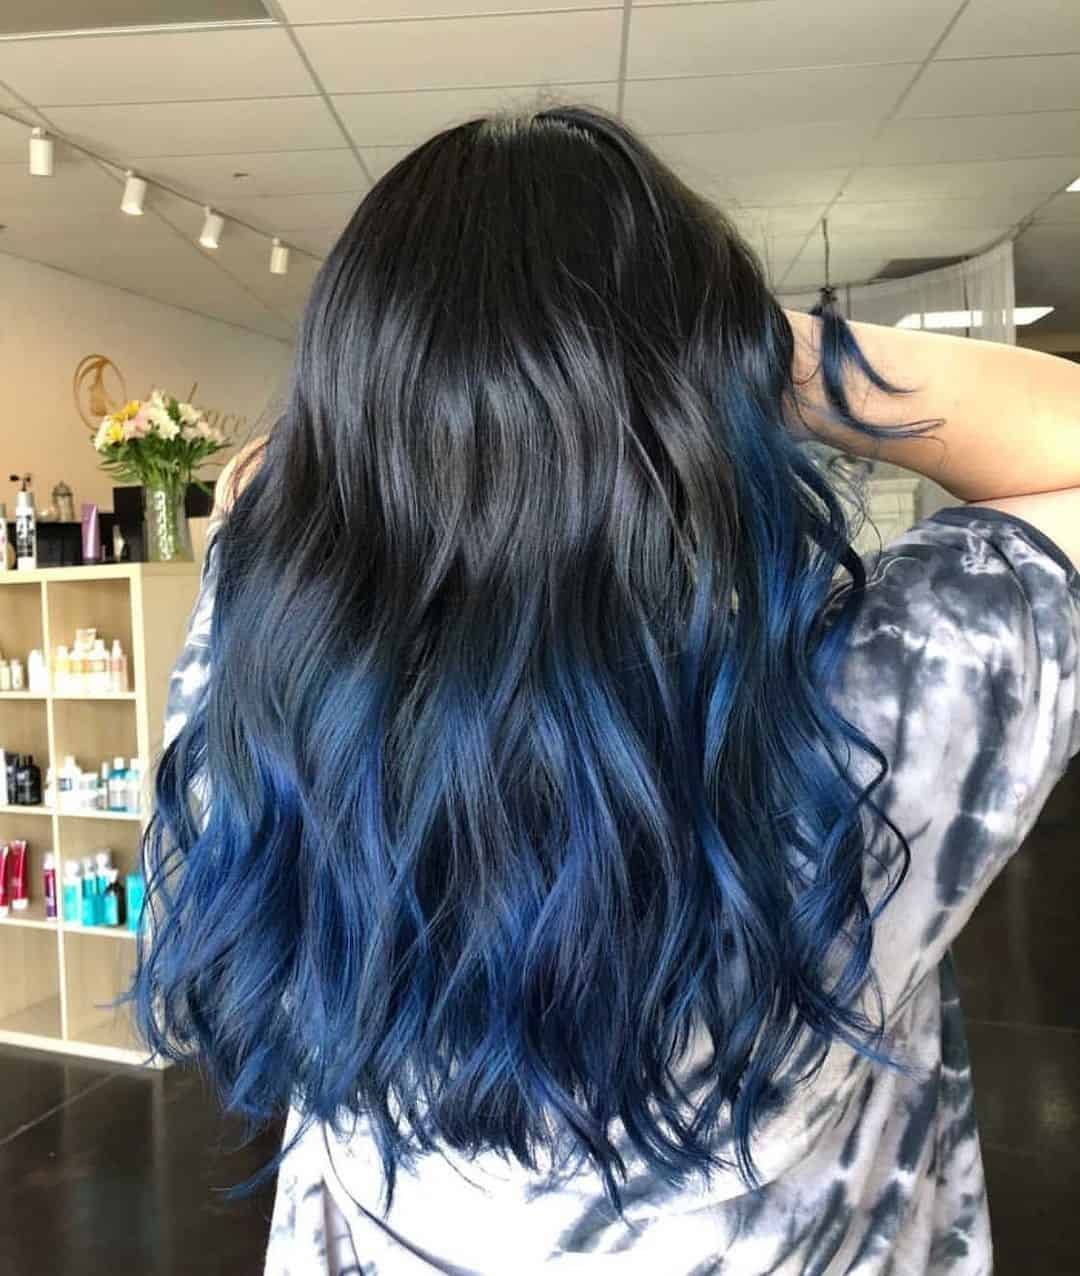 Pretty in Blue: Hair color ideas to enhance your beauty